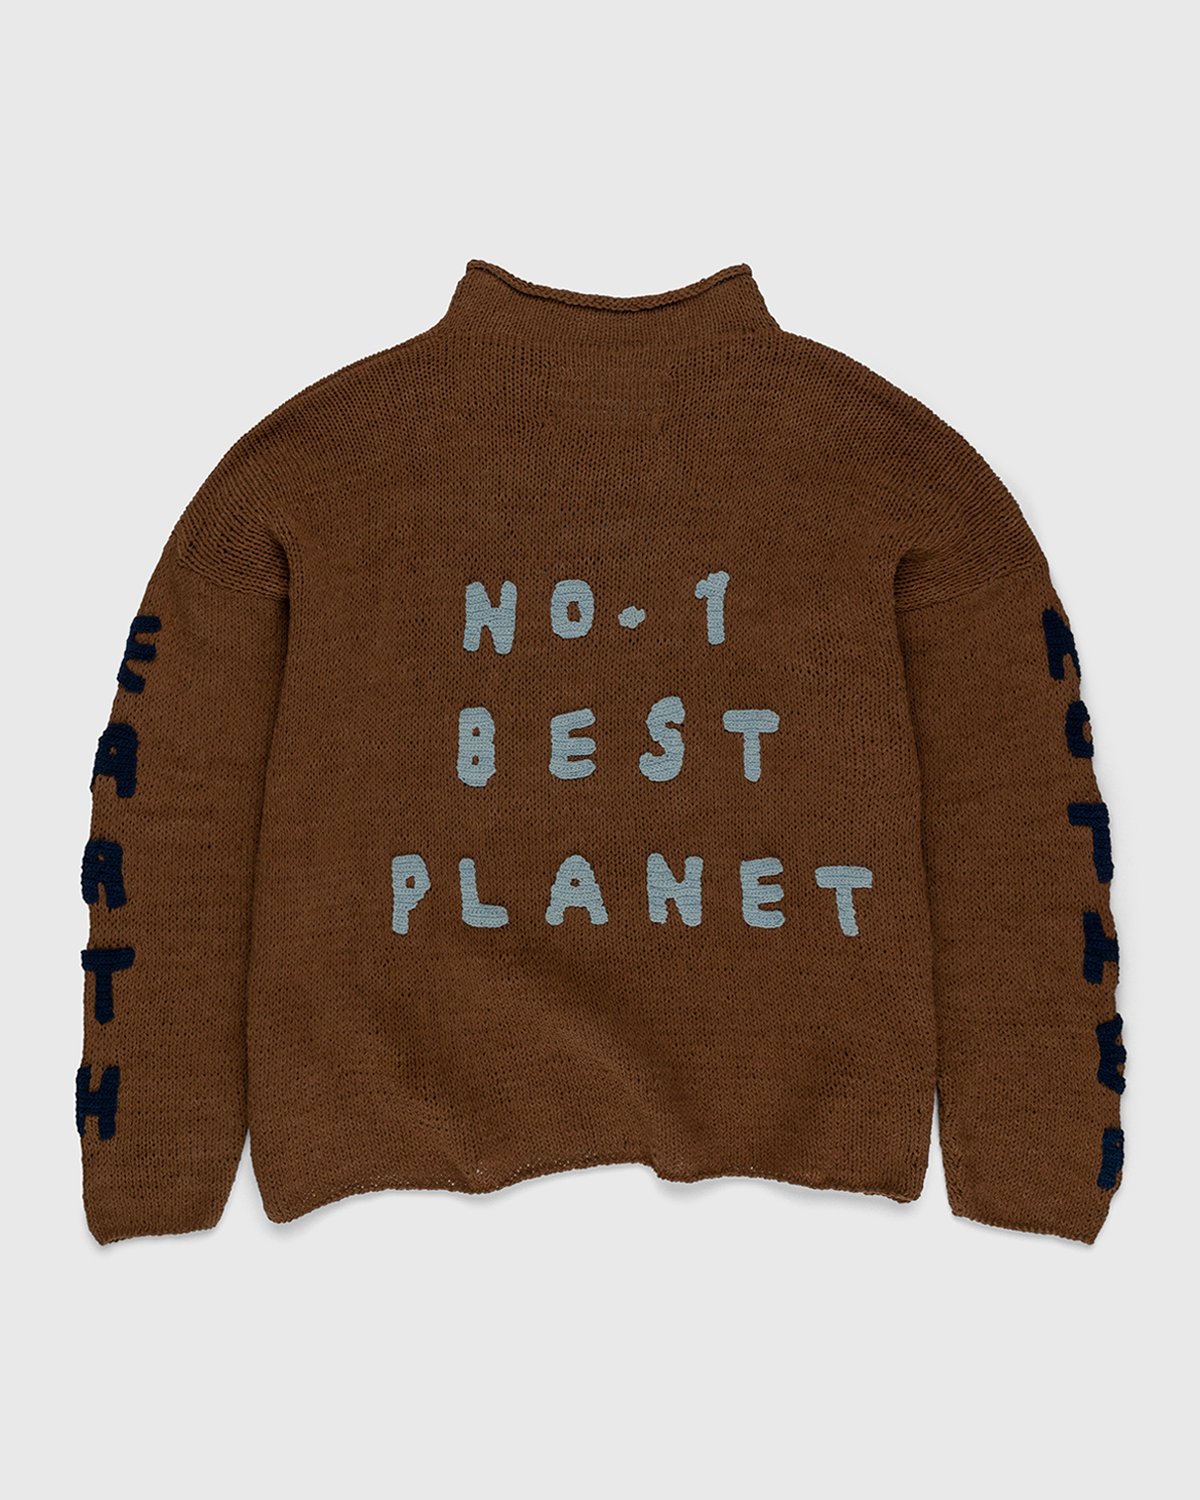 Story mfg. - Twinsun Rollneck Sweater Mother Earth Brown - Clothing - Brown - Image 2